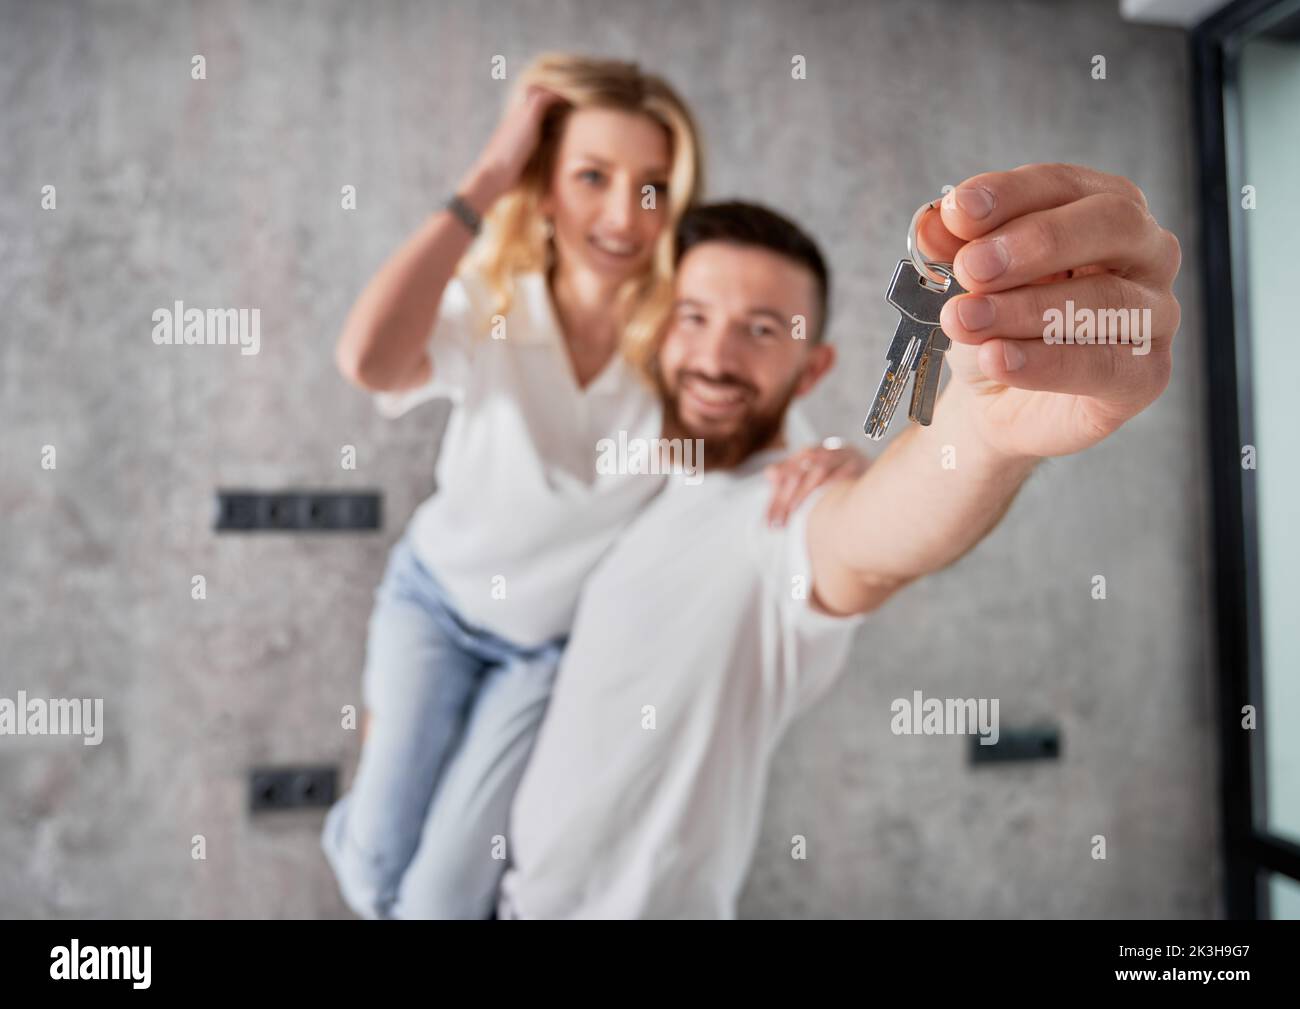 Cheerful man holding wife and smiling while showing apartment keys. Happy couple real estate house buyers demonstrating keys from new home. Focus on male hand with keys. Stock Photo